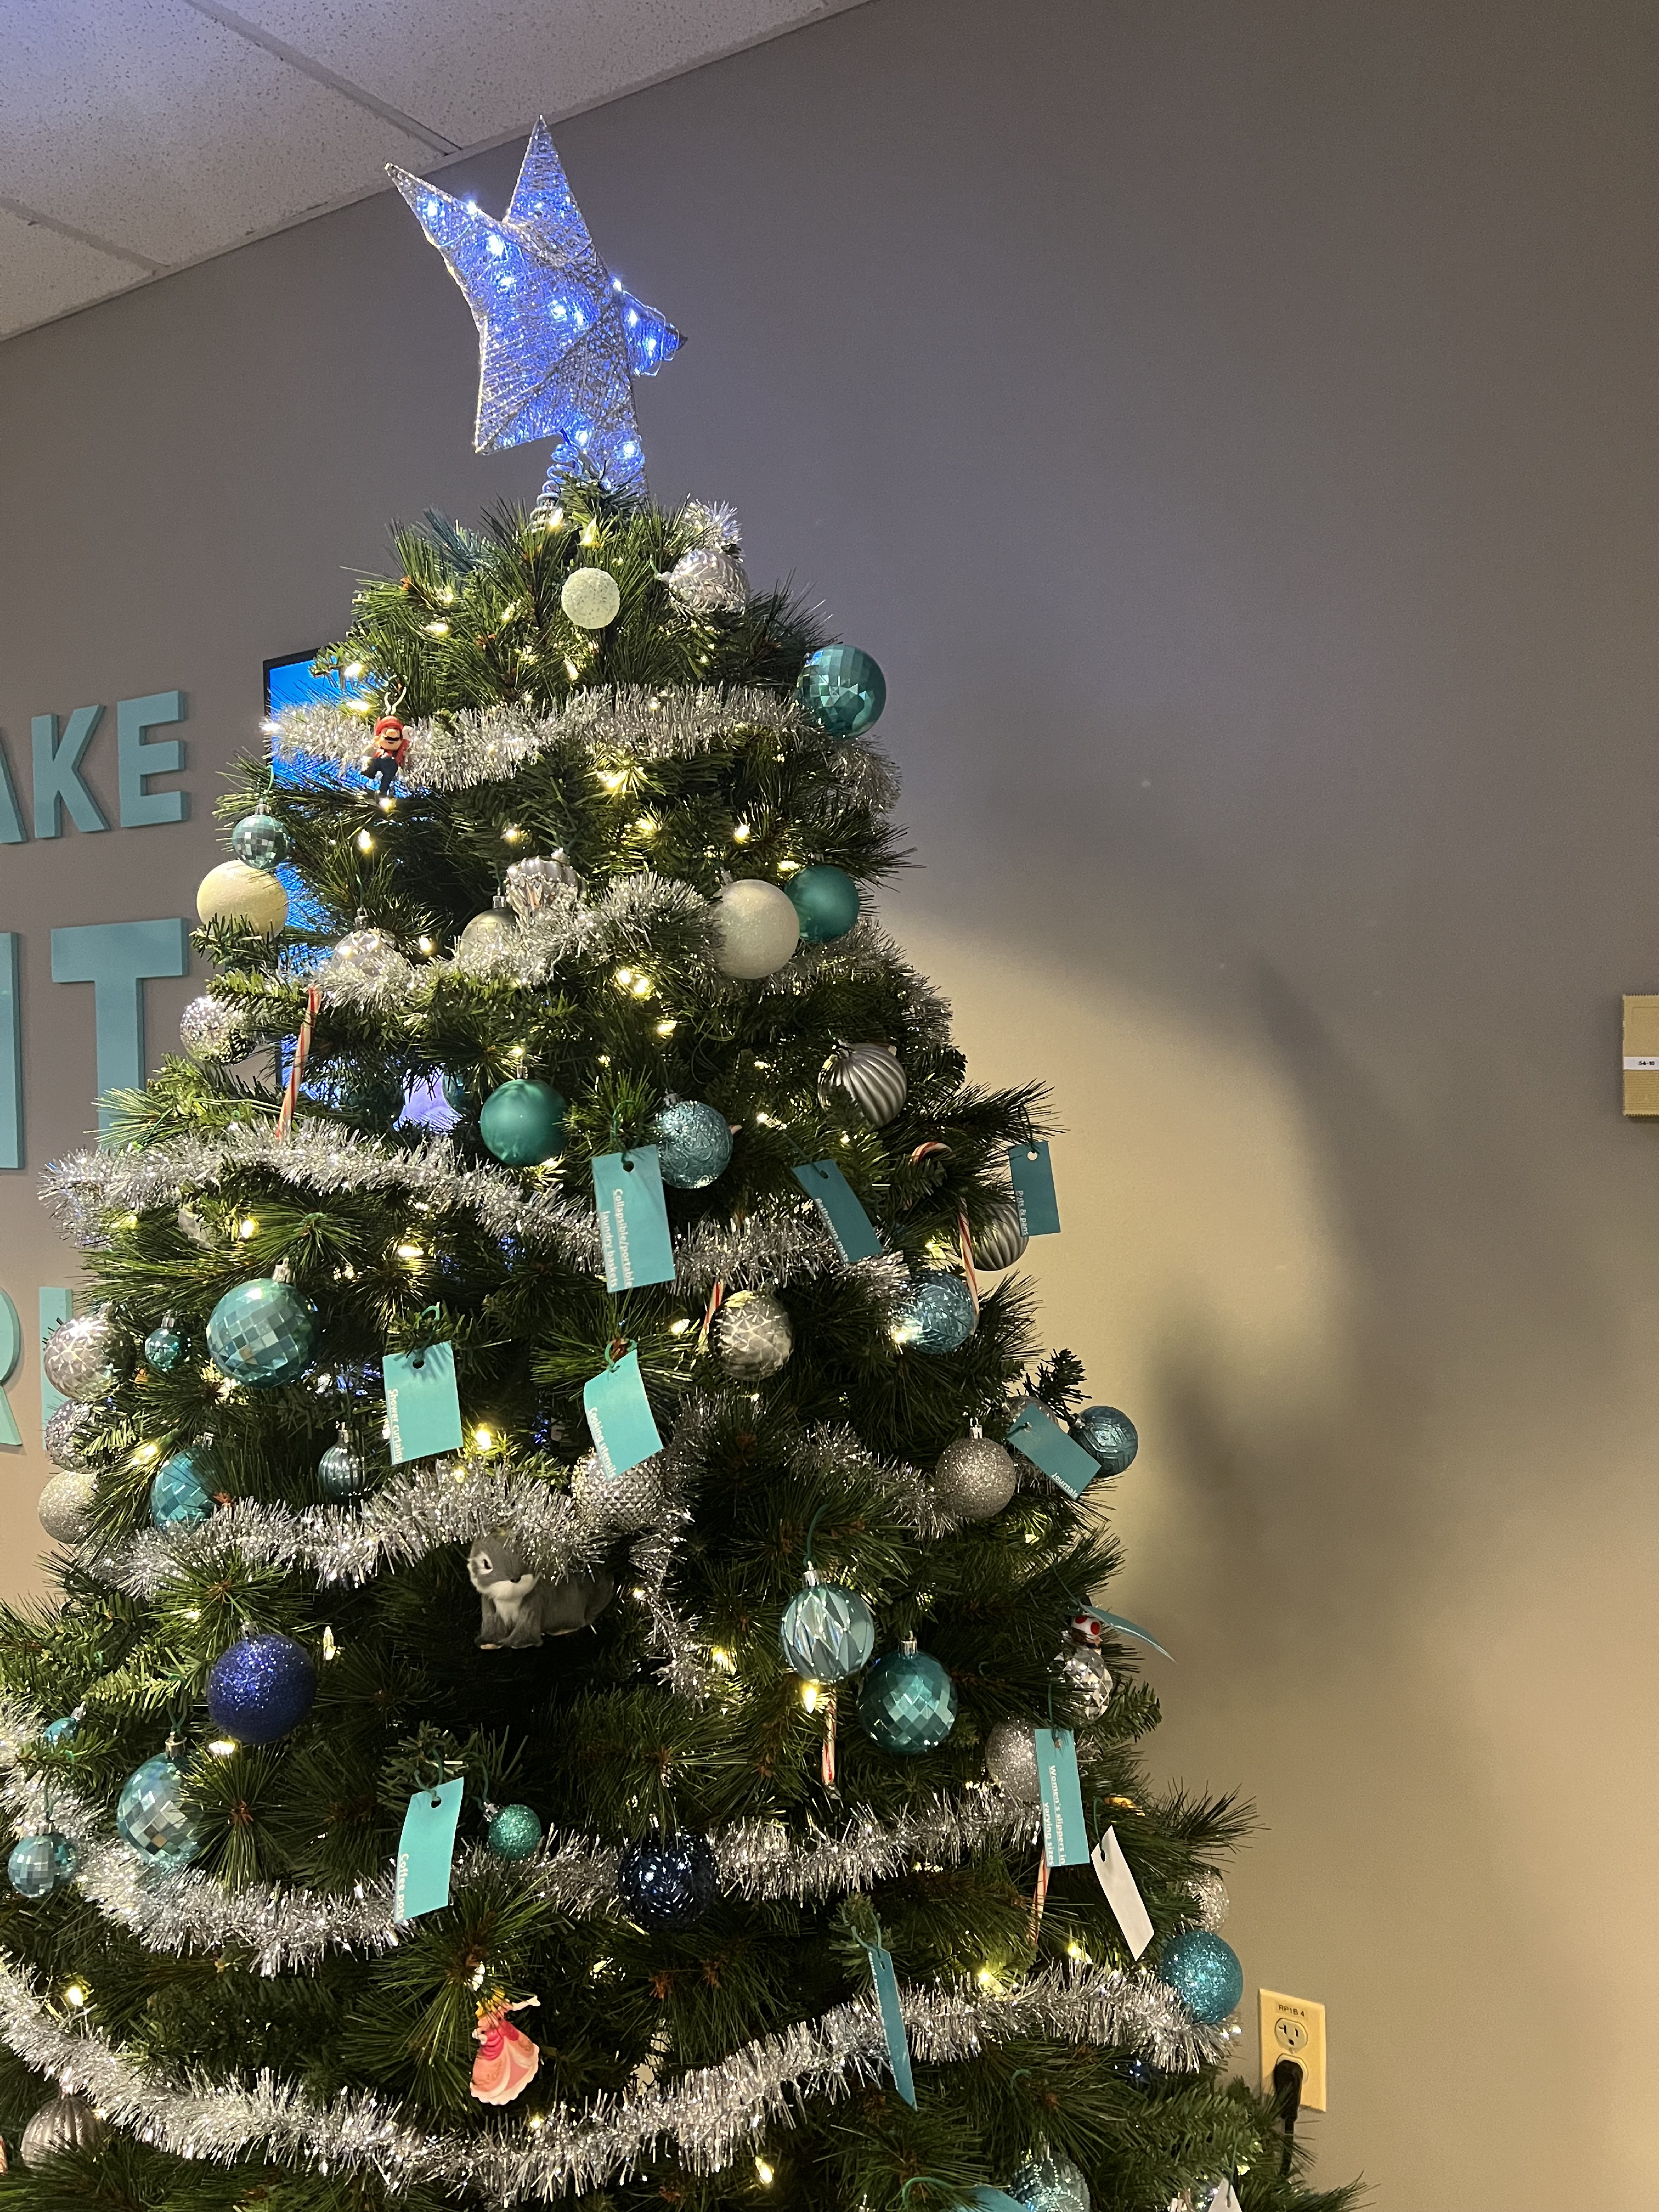 A Christmas tree with light blue ornaments decorating it along with tags having donated supplies on them.